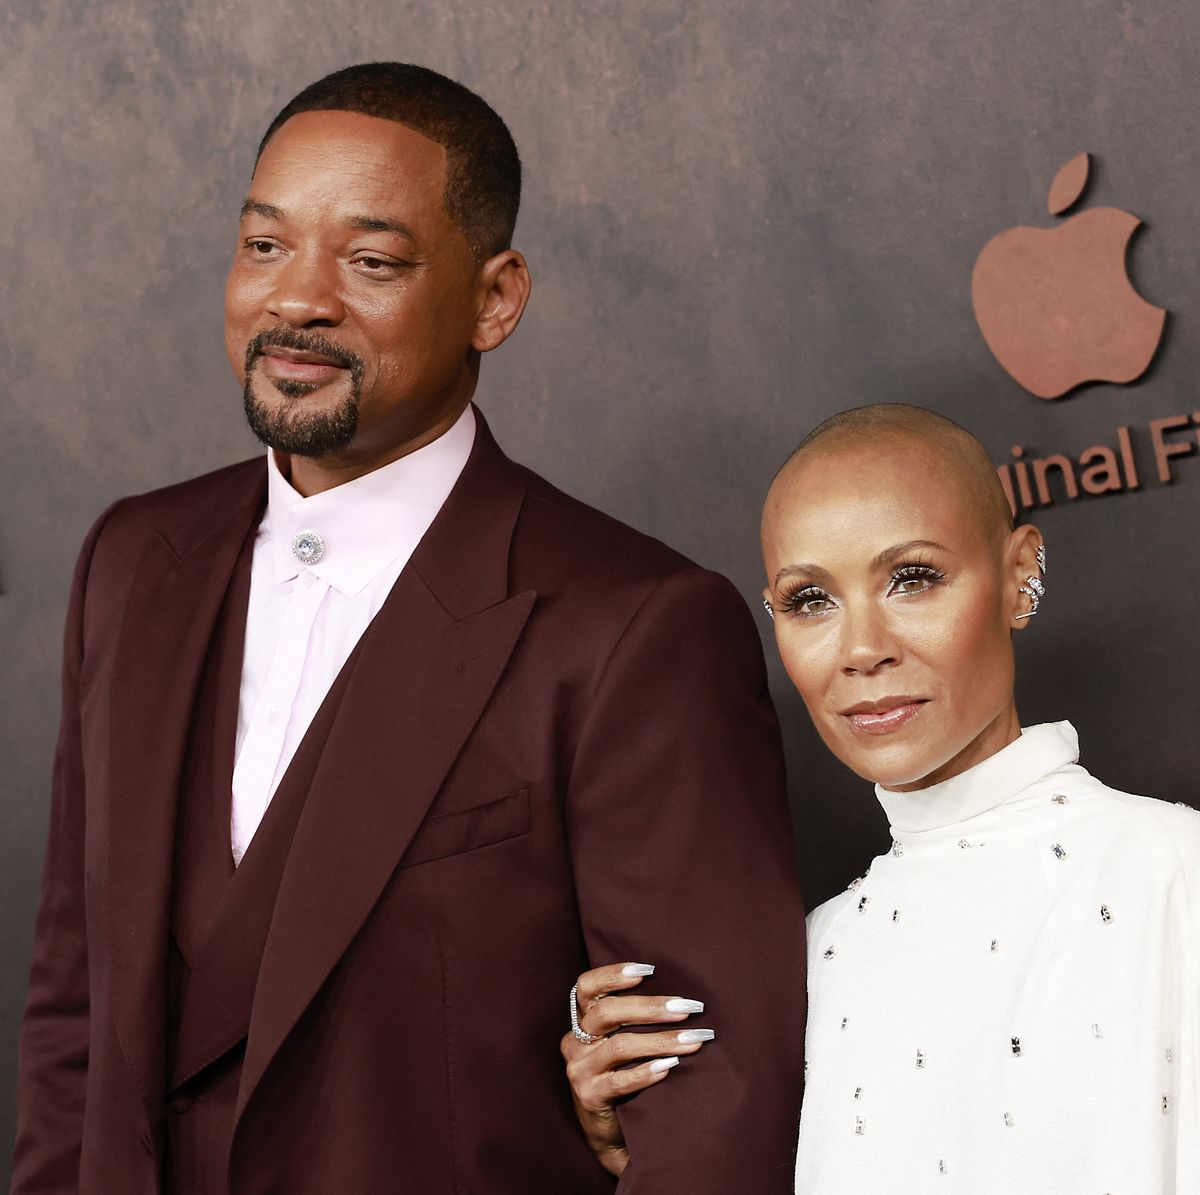 Jada Pinkett Smith and Will Smith's Open Relationship Timeline